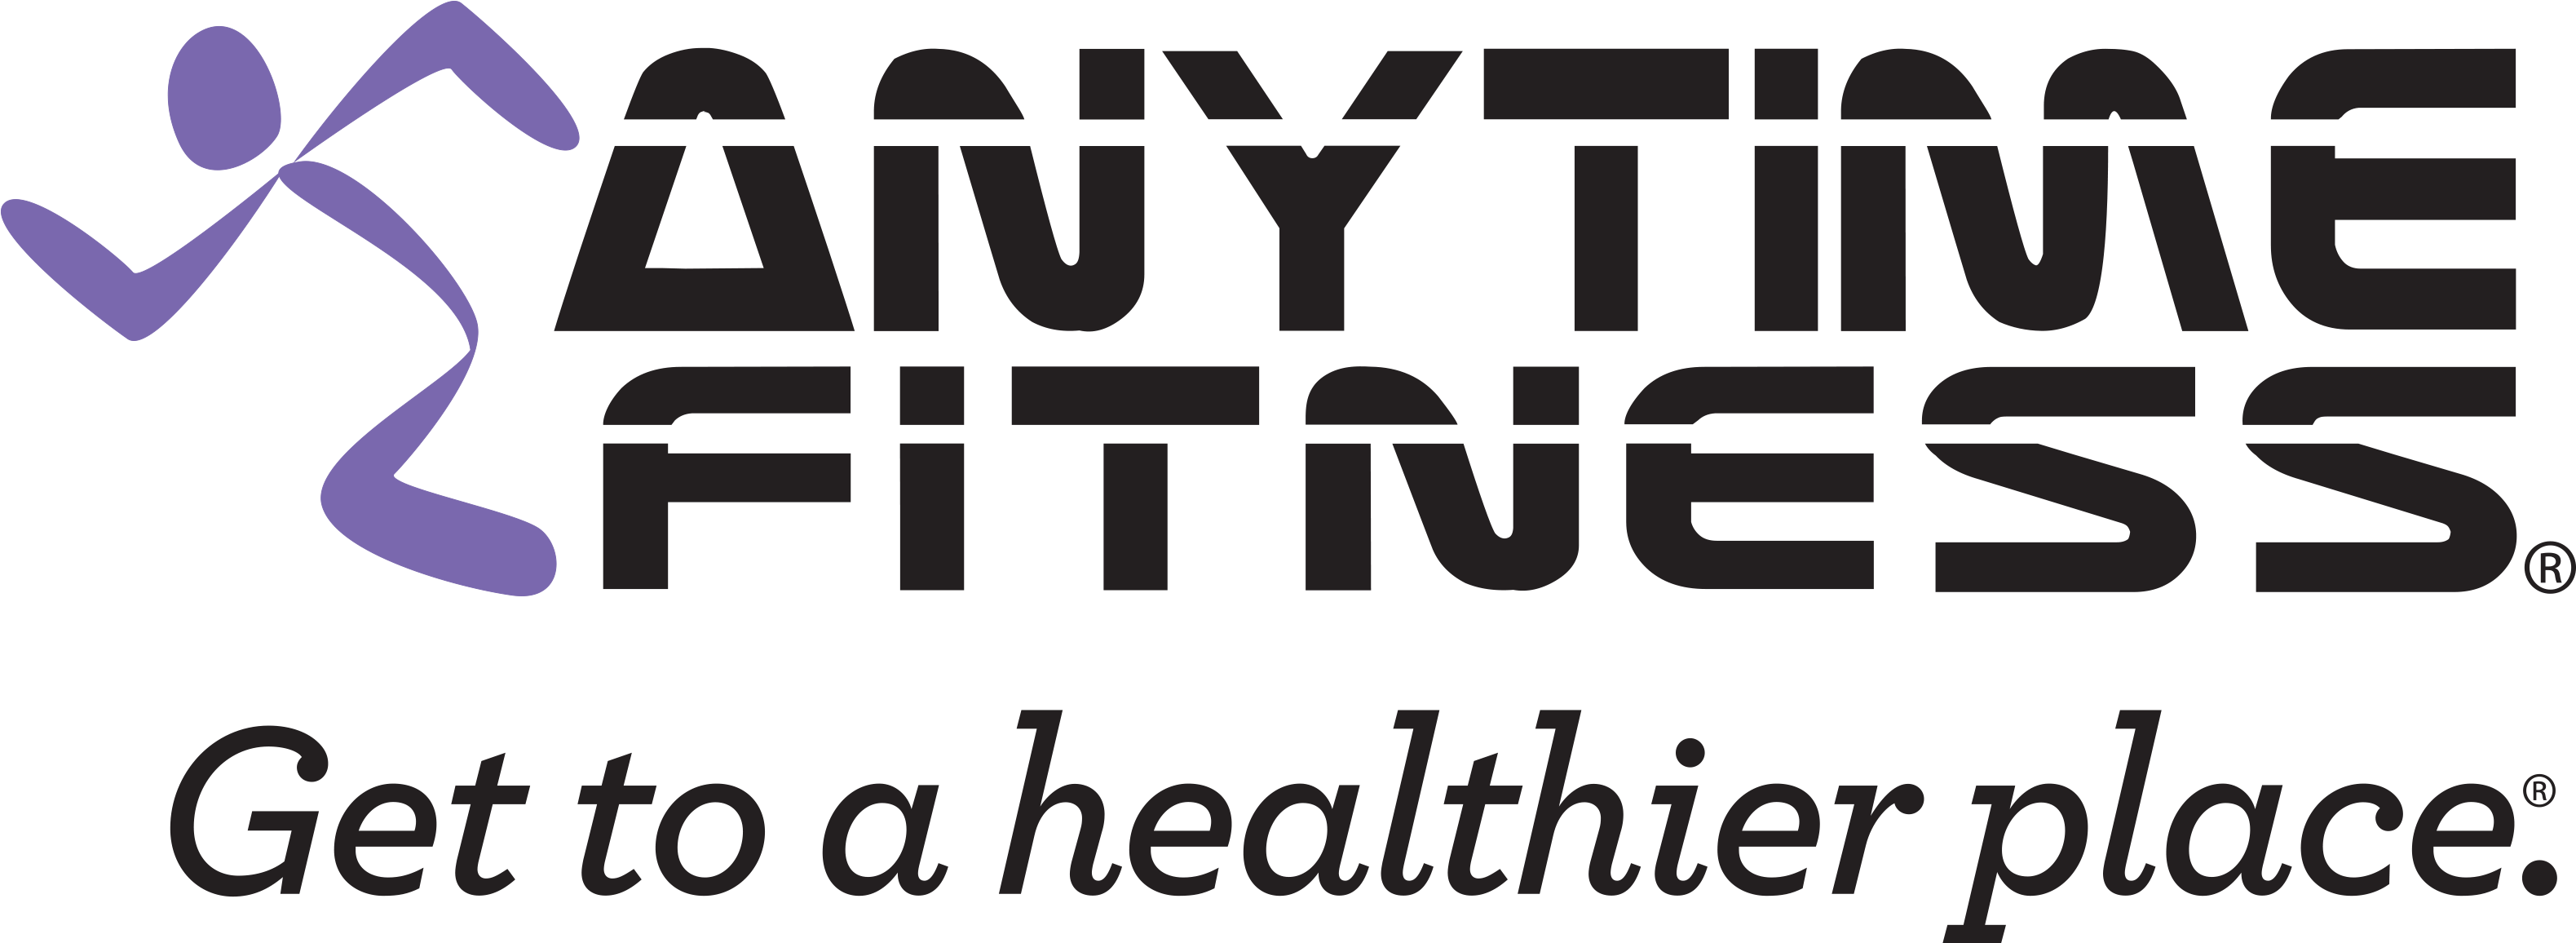 Download Anytime Fitness Get To A Healthier Place Logo - Anytime Fitness Get To A Healthier Place (3176x1201), Png Download